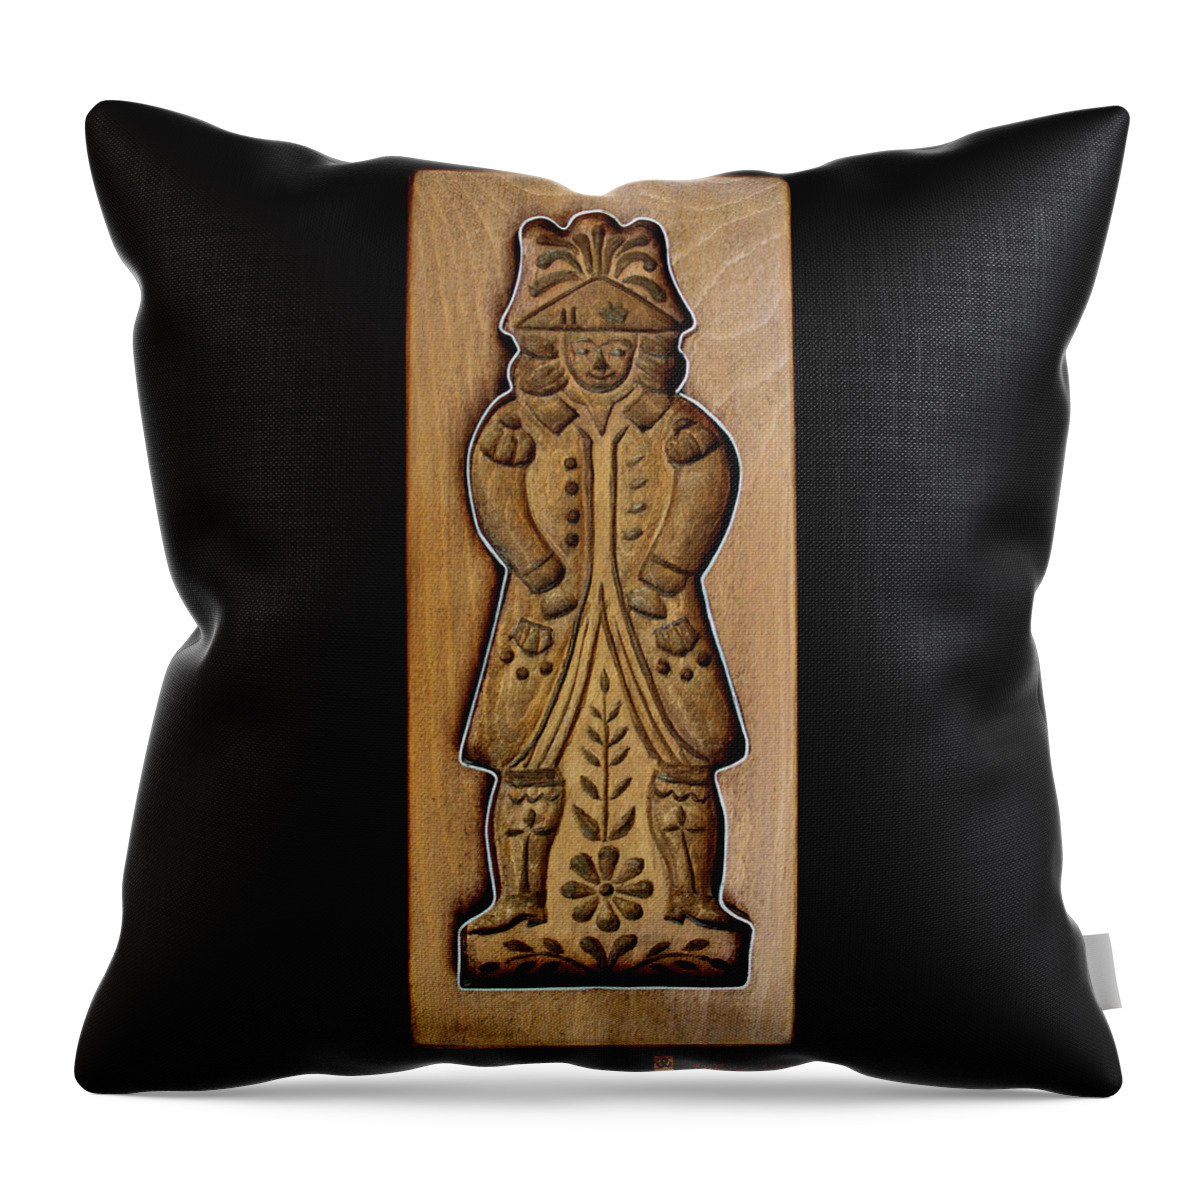 Wood Carving Throw Pillow featuring the photograph Cookie Mold 1 by Hanne Lore Koehler